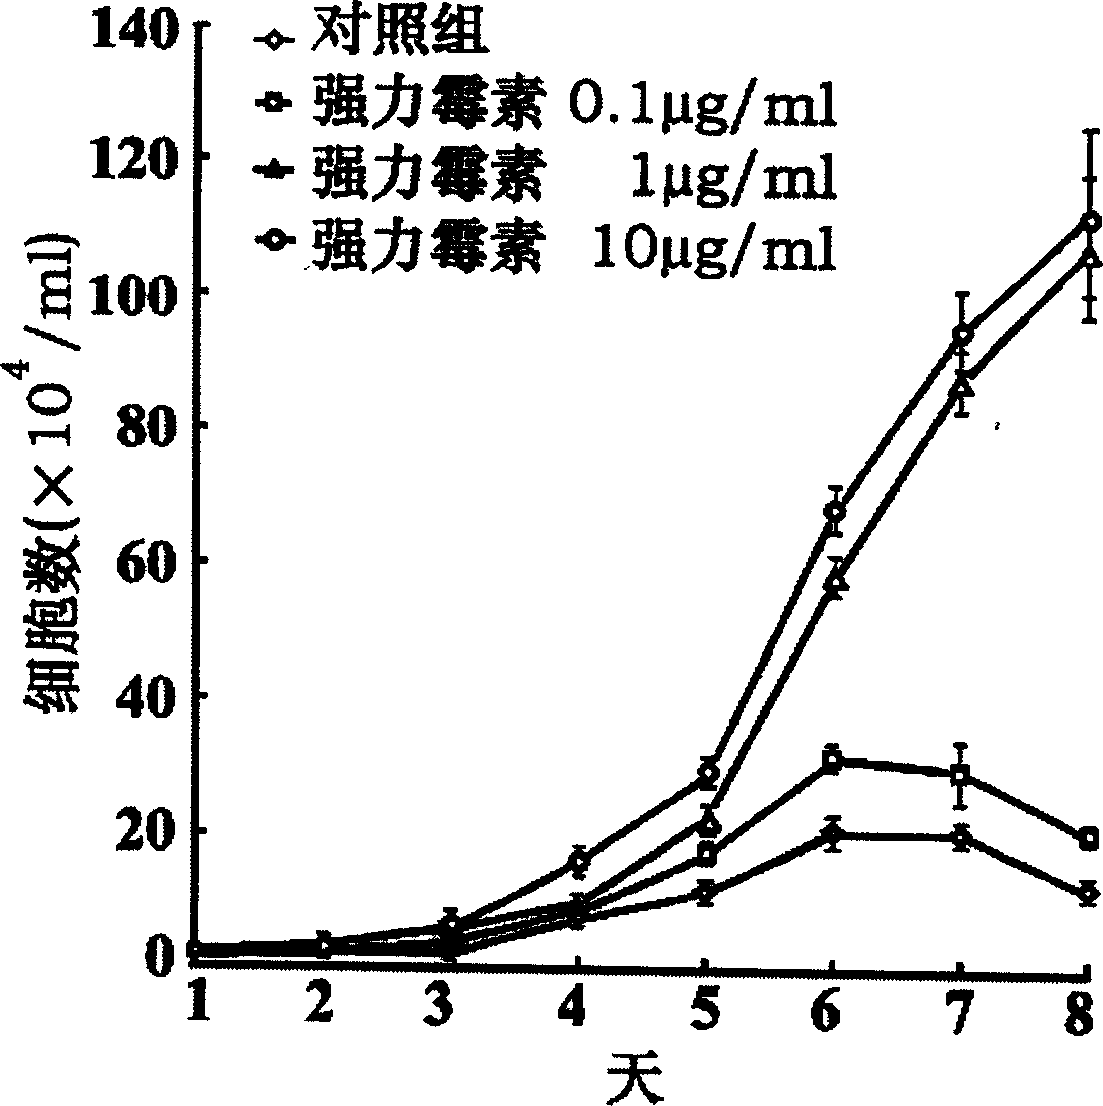 Application of doxycycline ad medicine for promoting cell proliferation